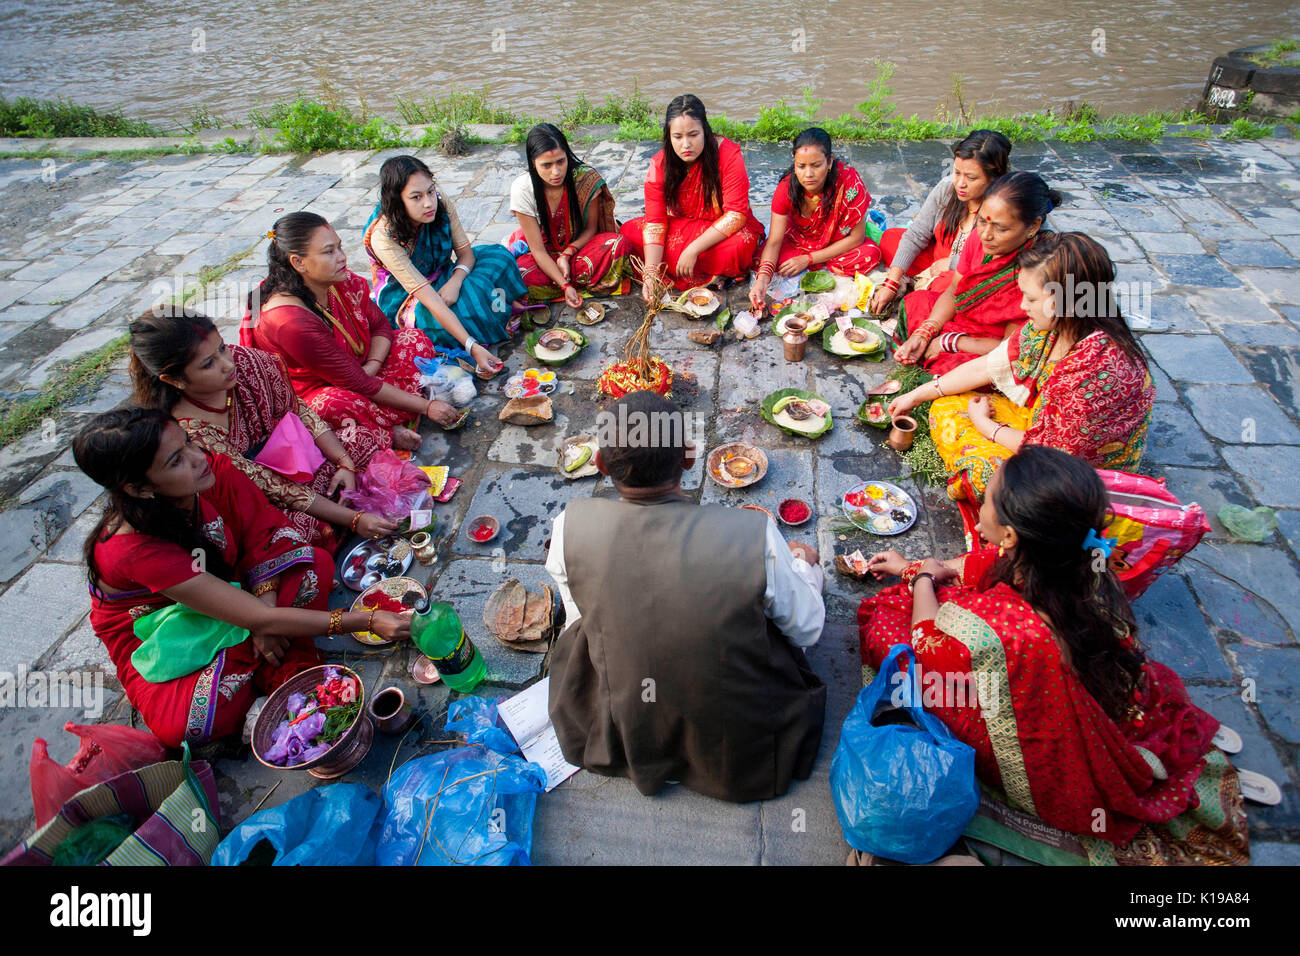 Kathmandu, Nepal. 26th Aug, 2017. women offer prayers at the bank of Bagmati River during Rishi Panchami festival in Kathmandu, Nepal, Aug. 26, 2017. Rishi Panchami festival marks the end of the three-day Teej festival when women worship Sapta Rishi (Seven Saints) and pray for health for their husband while unmarried women wish for handsome husband and happy conjugal lives. Credit: Pratap Thapa/Xinhua/Alamy Live News Stock Photo